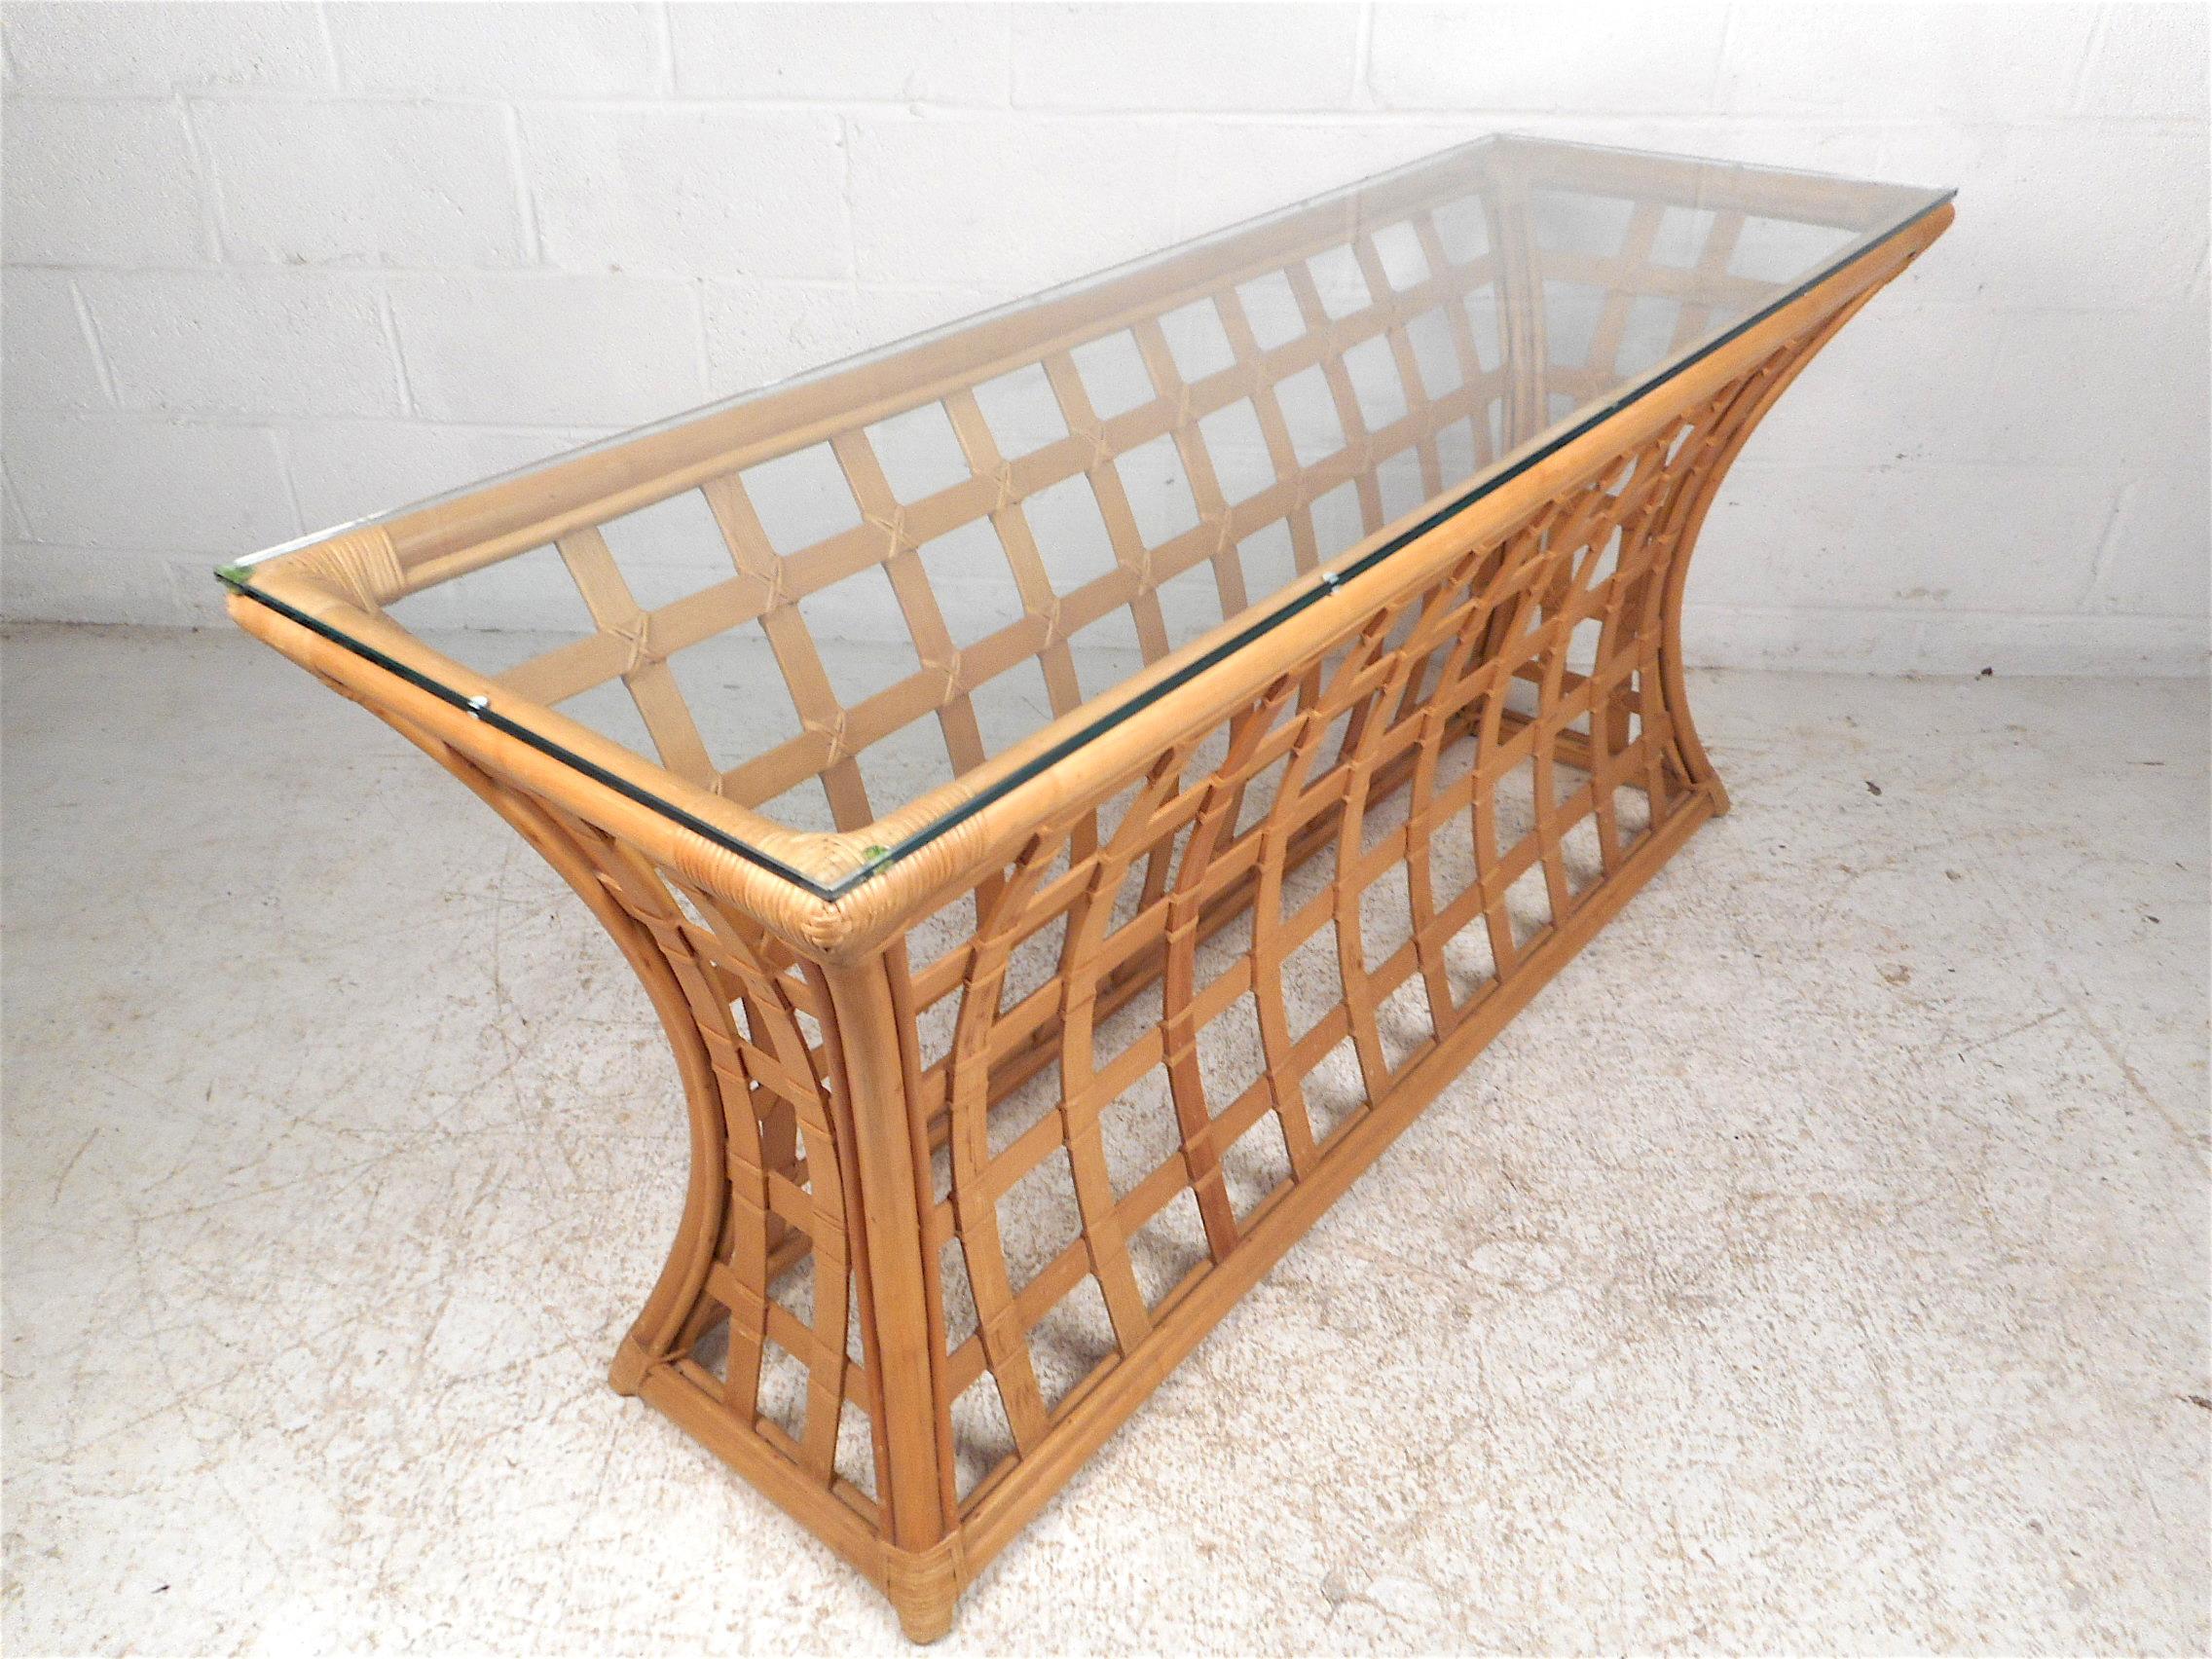 Unique vintage modern bamboo and glass console table. Base features an interesting hourglass contour, giving the piece a striking visual profile. A pane of 3/8th in. glass with beveled edges serves as the tabletop. An impressive addition to any